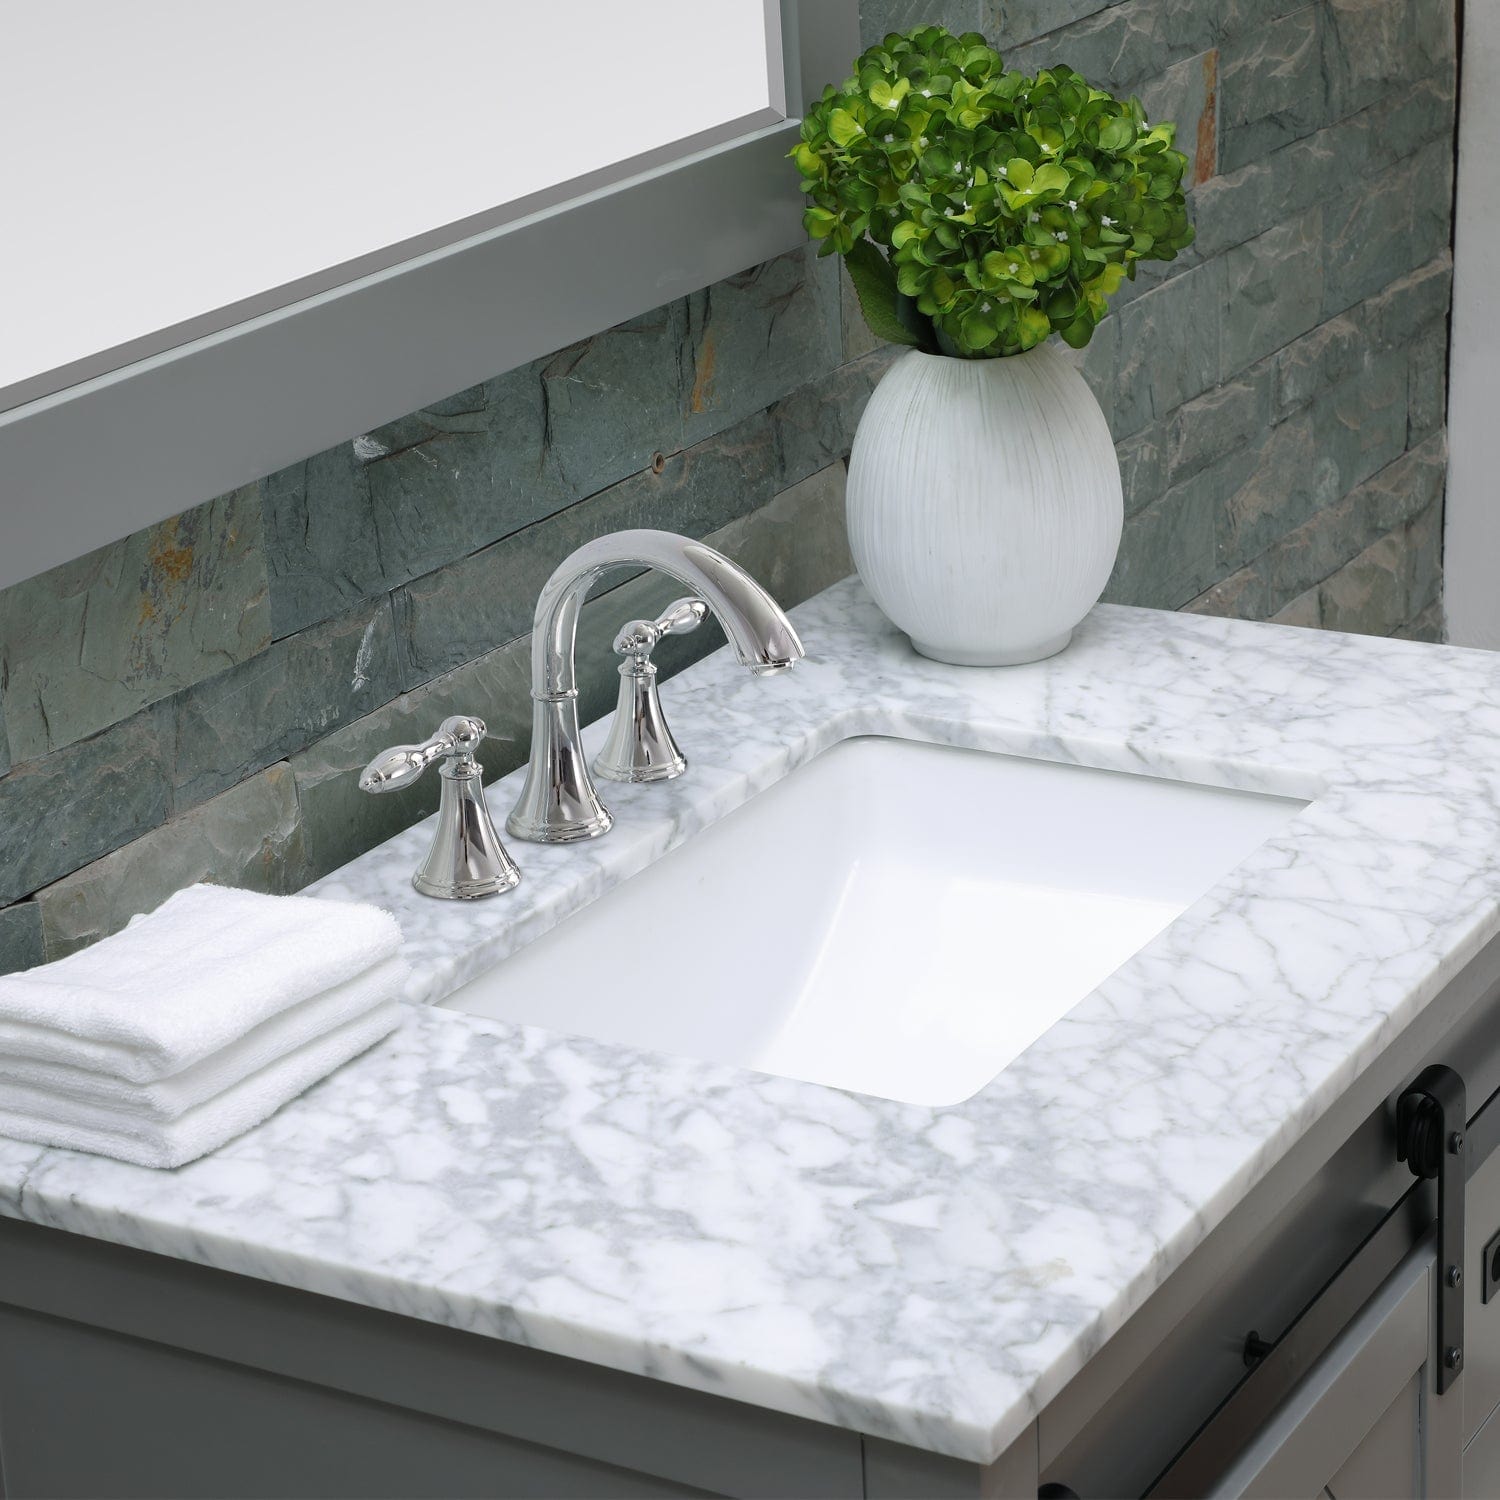 Altair Kinsley 36" Single Bathroom Vanity Set in Gray and Carrara White Marble Countertop without Mirror 536036-GR-CA-NM - Molaix631112970440Vanity536036-GR-CA-NM